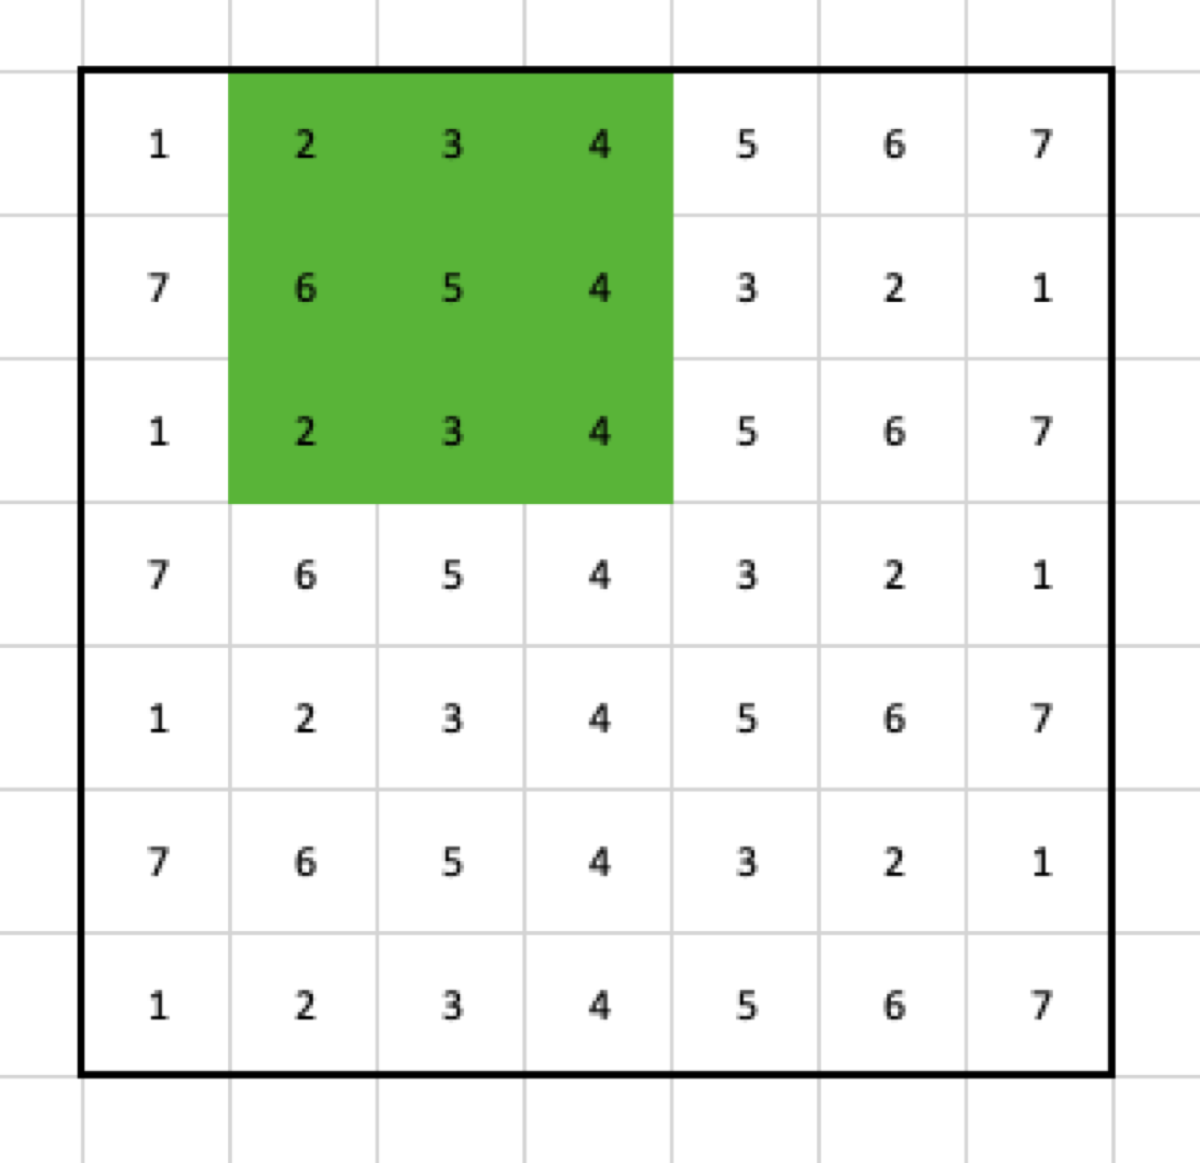 Cells selected by the 3x3 max pooling filter in the second step